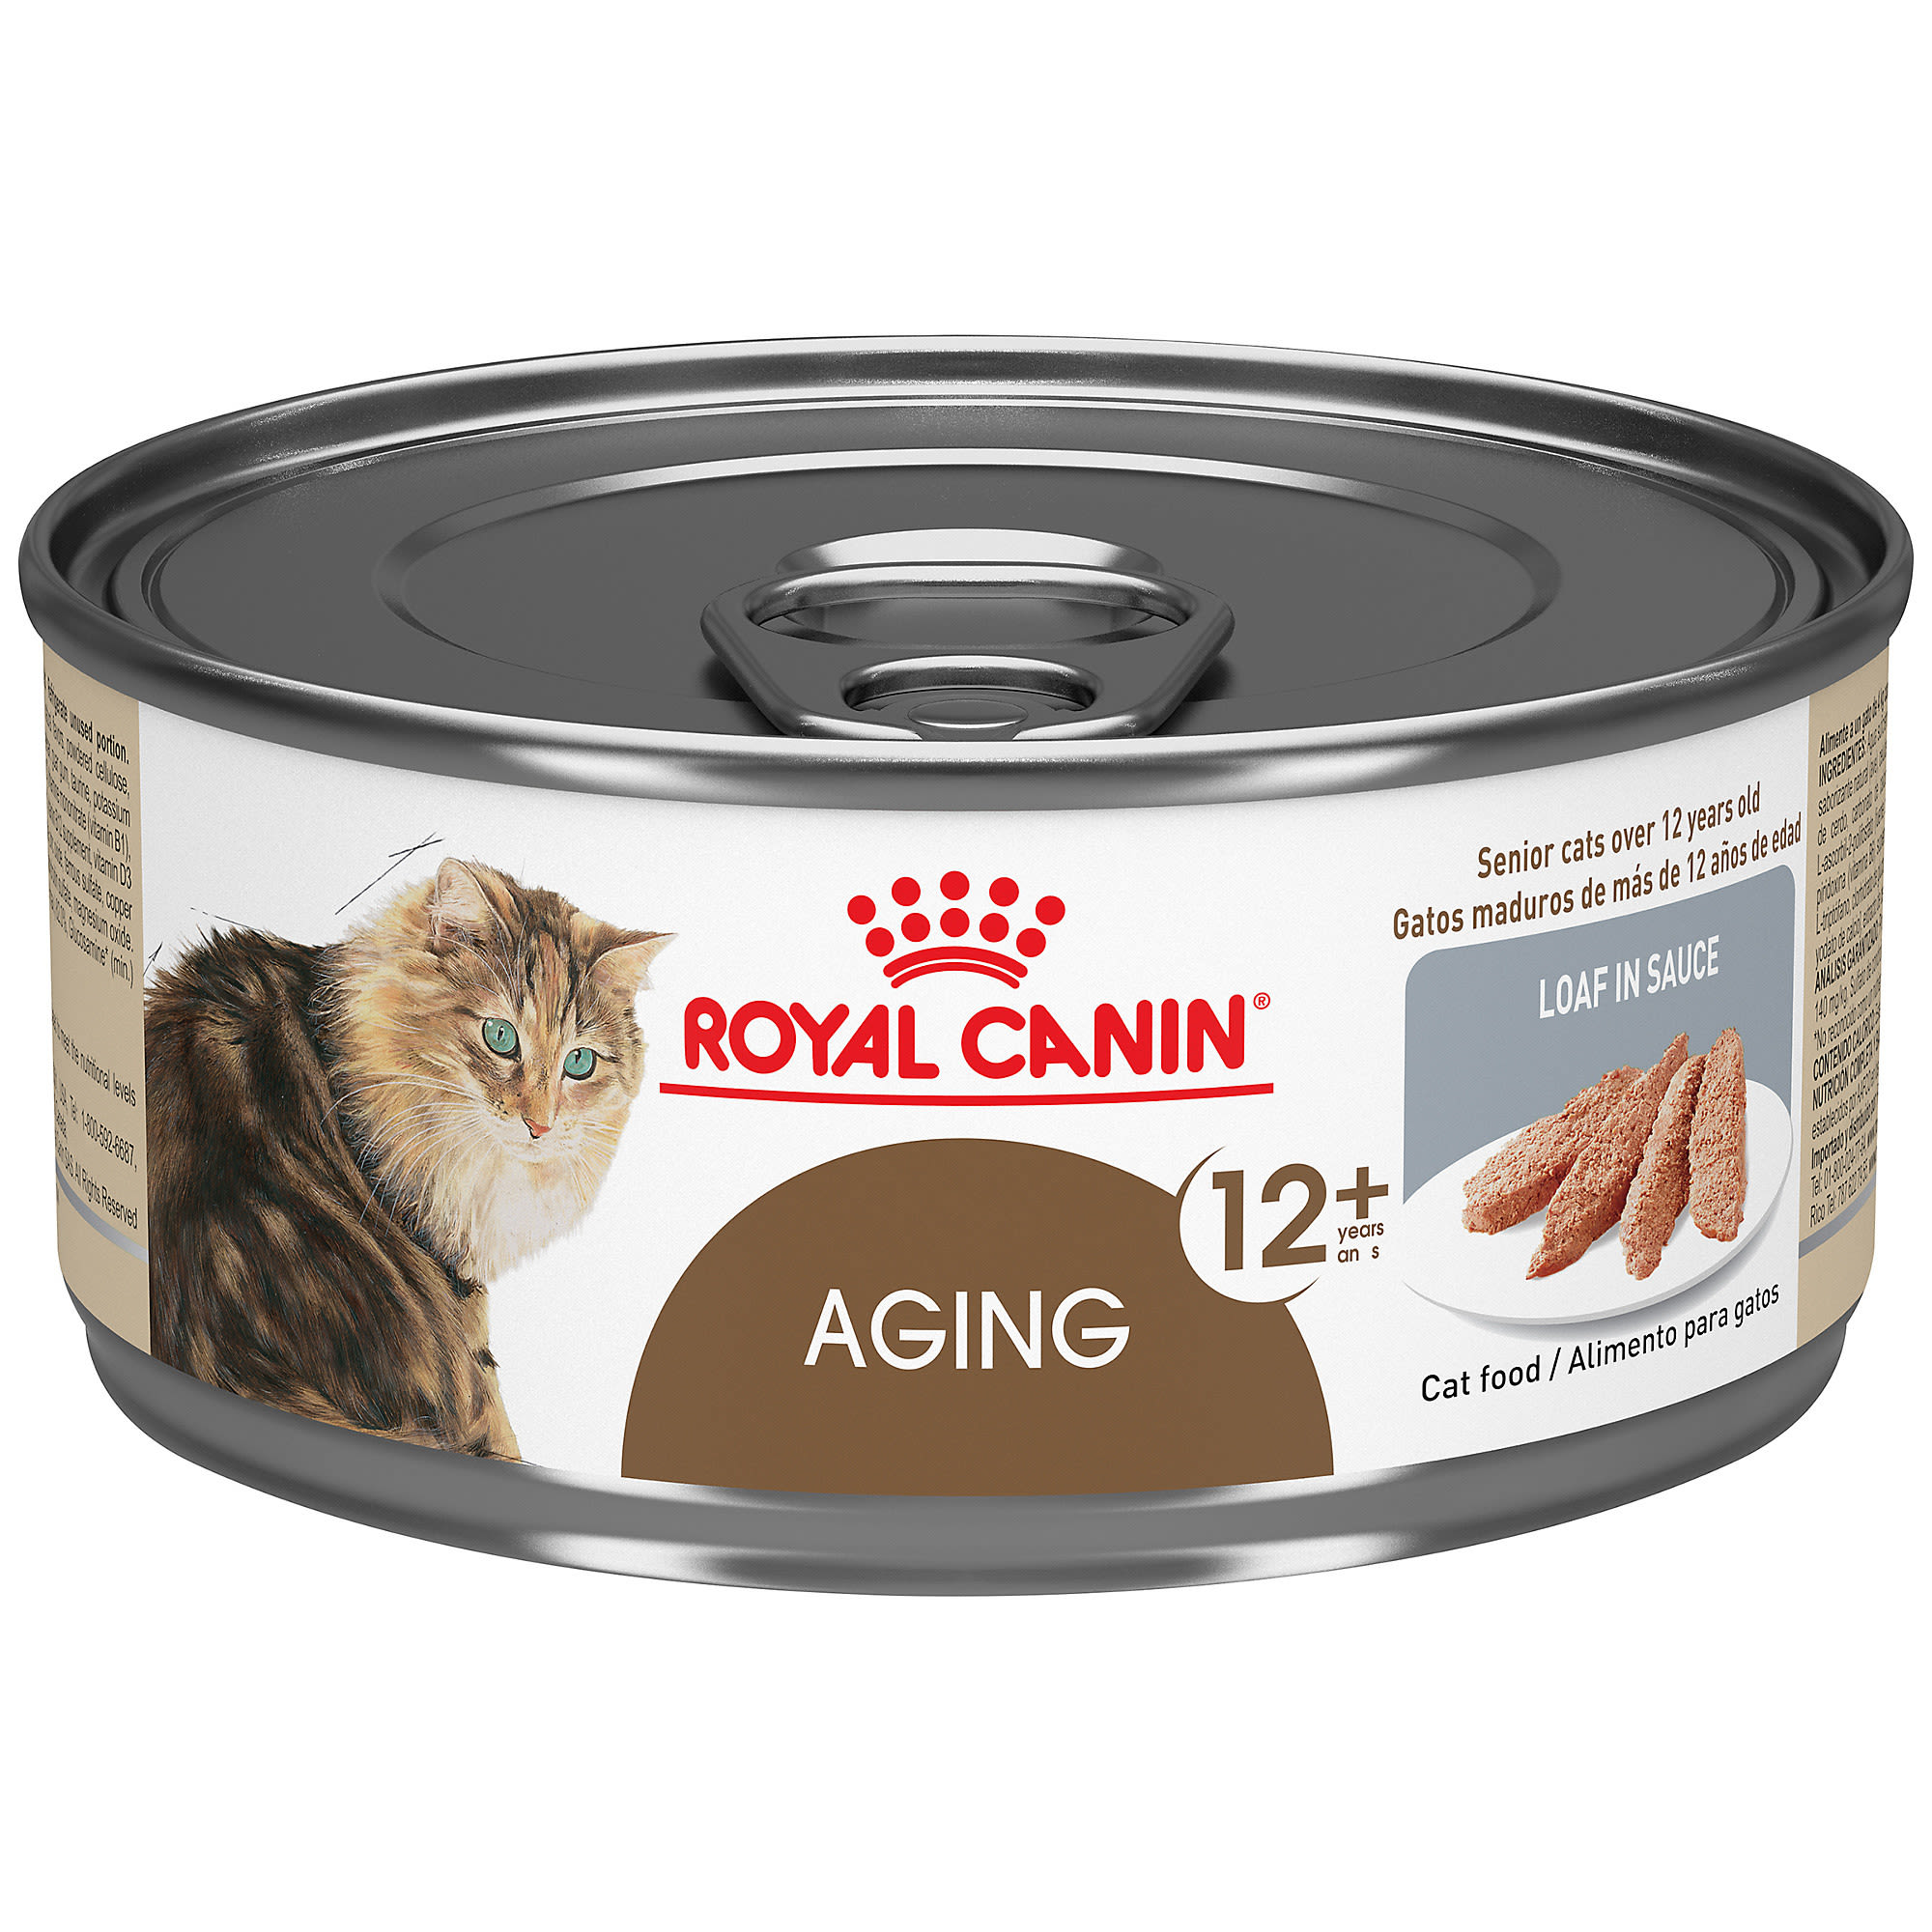 Royal Canin Aging 12 Loaf In Sauce Wet Cat Food 5 8 Oz Case Of 24 Petco